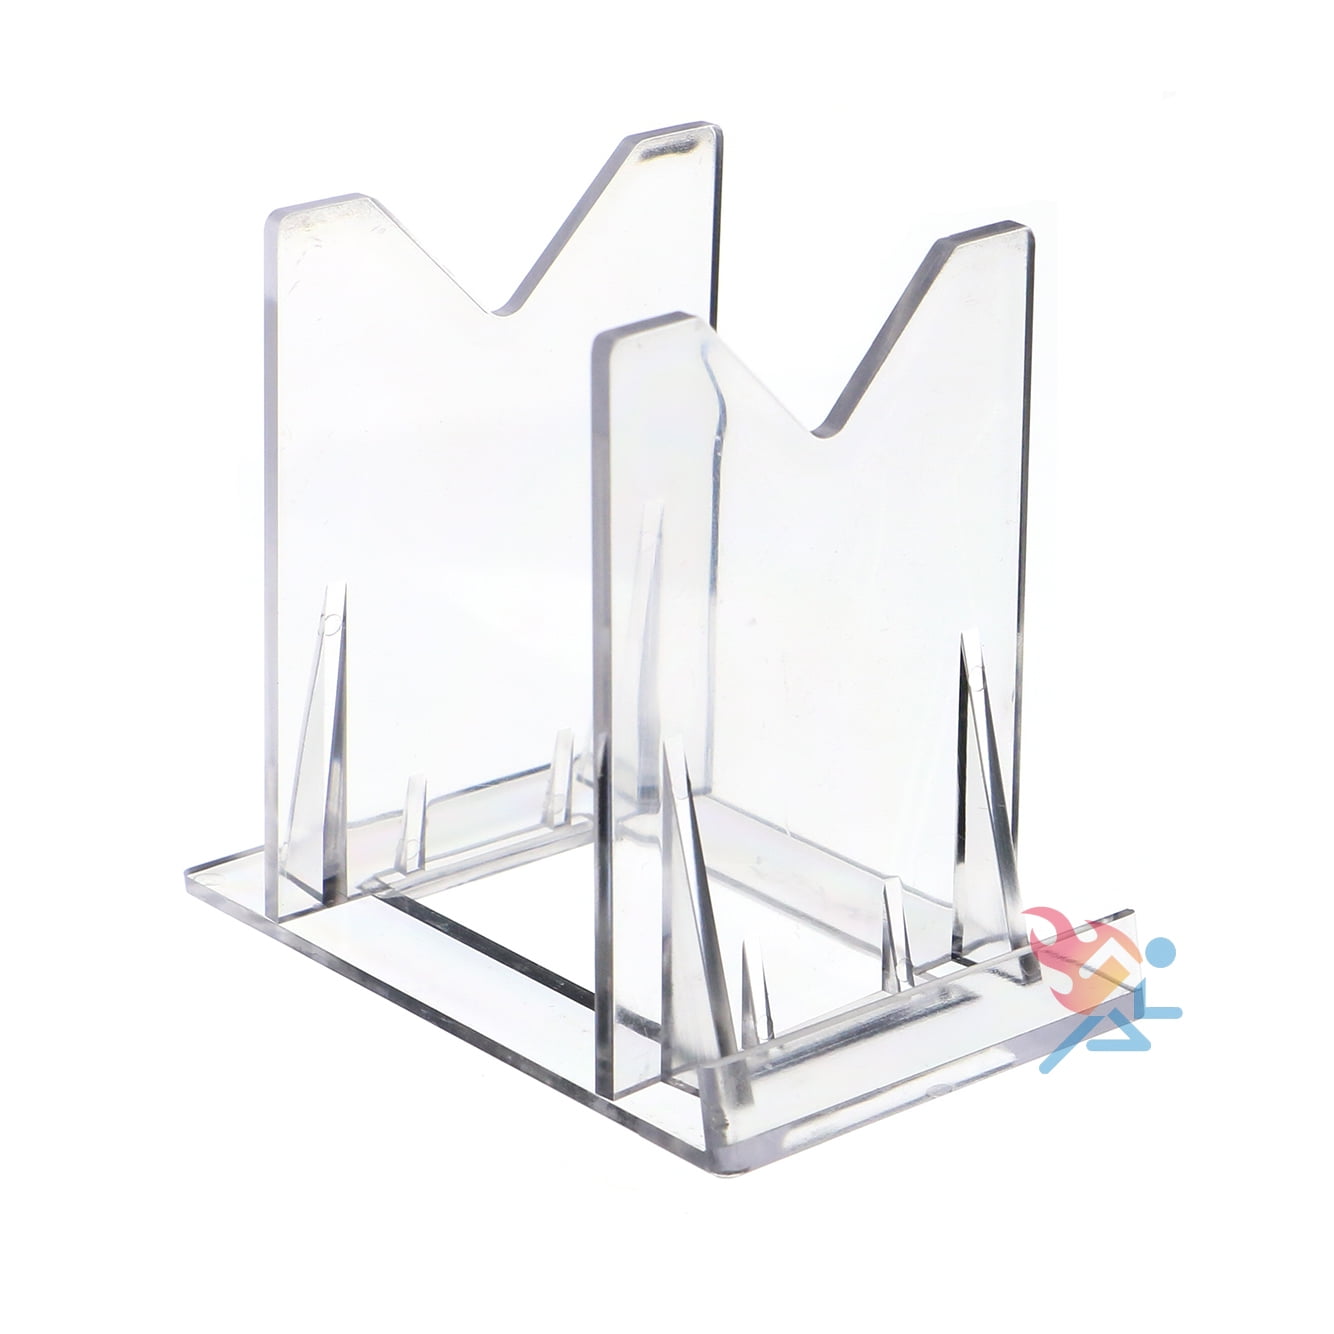 *25 Fishing Lure Display Stand Easels 3 piece adjustable 